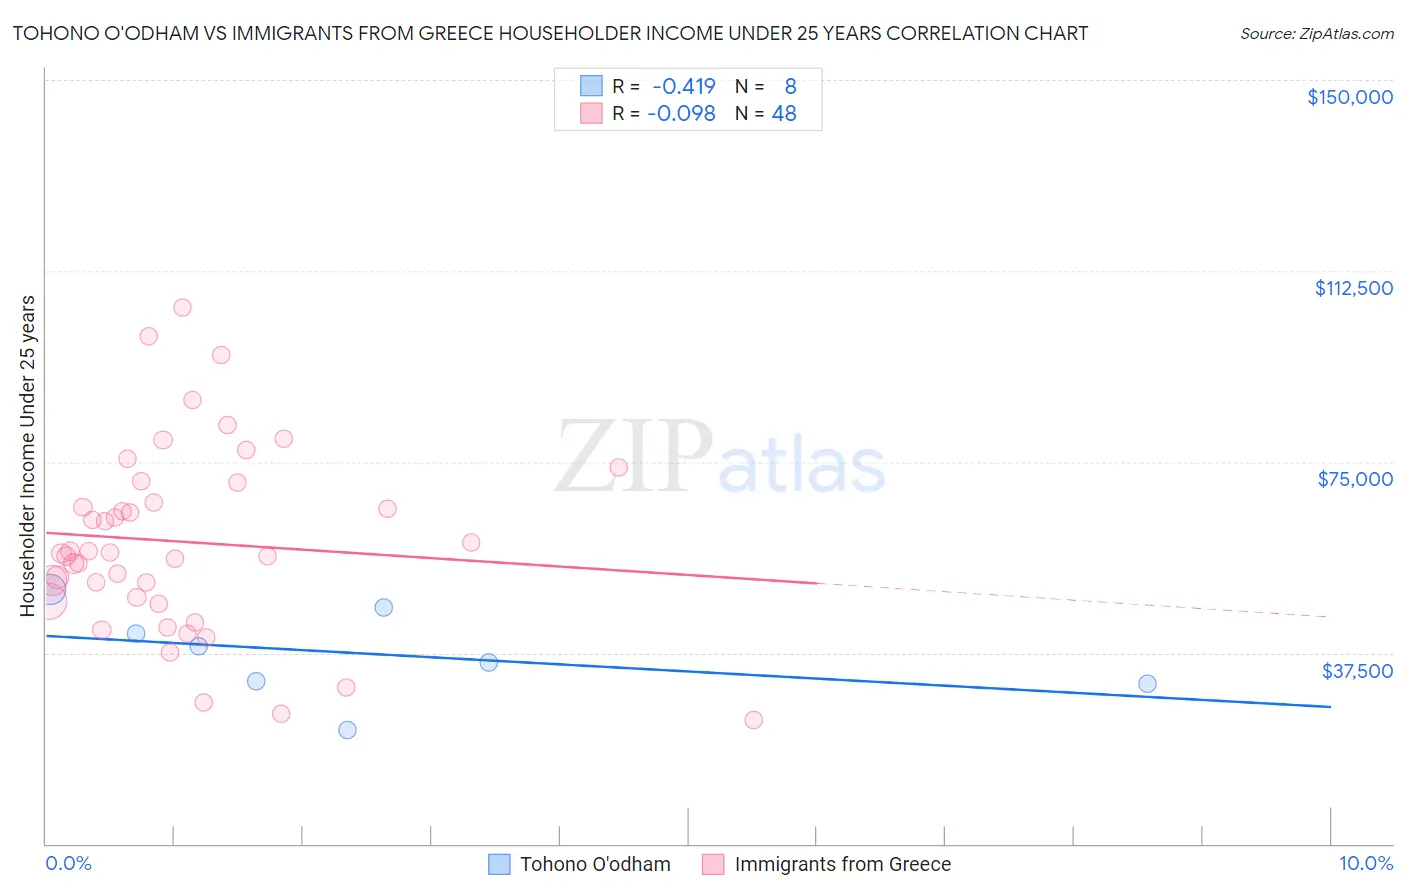 Tohono O'odham vs Immigrants from Greece Householder Income Under 25 years